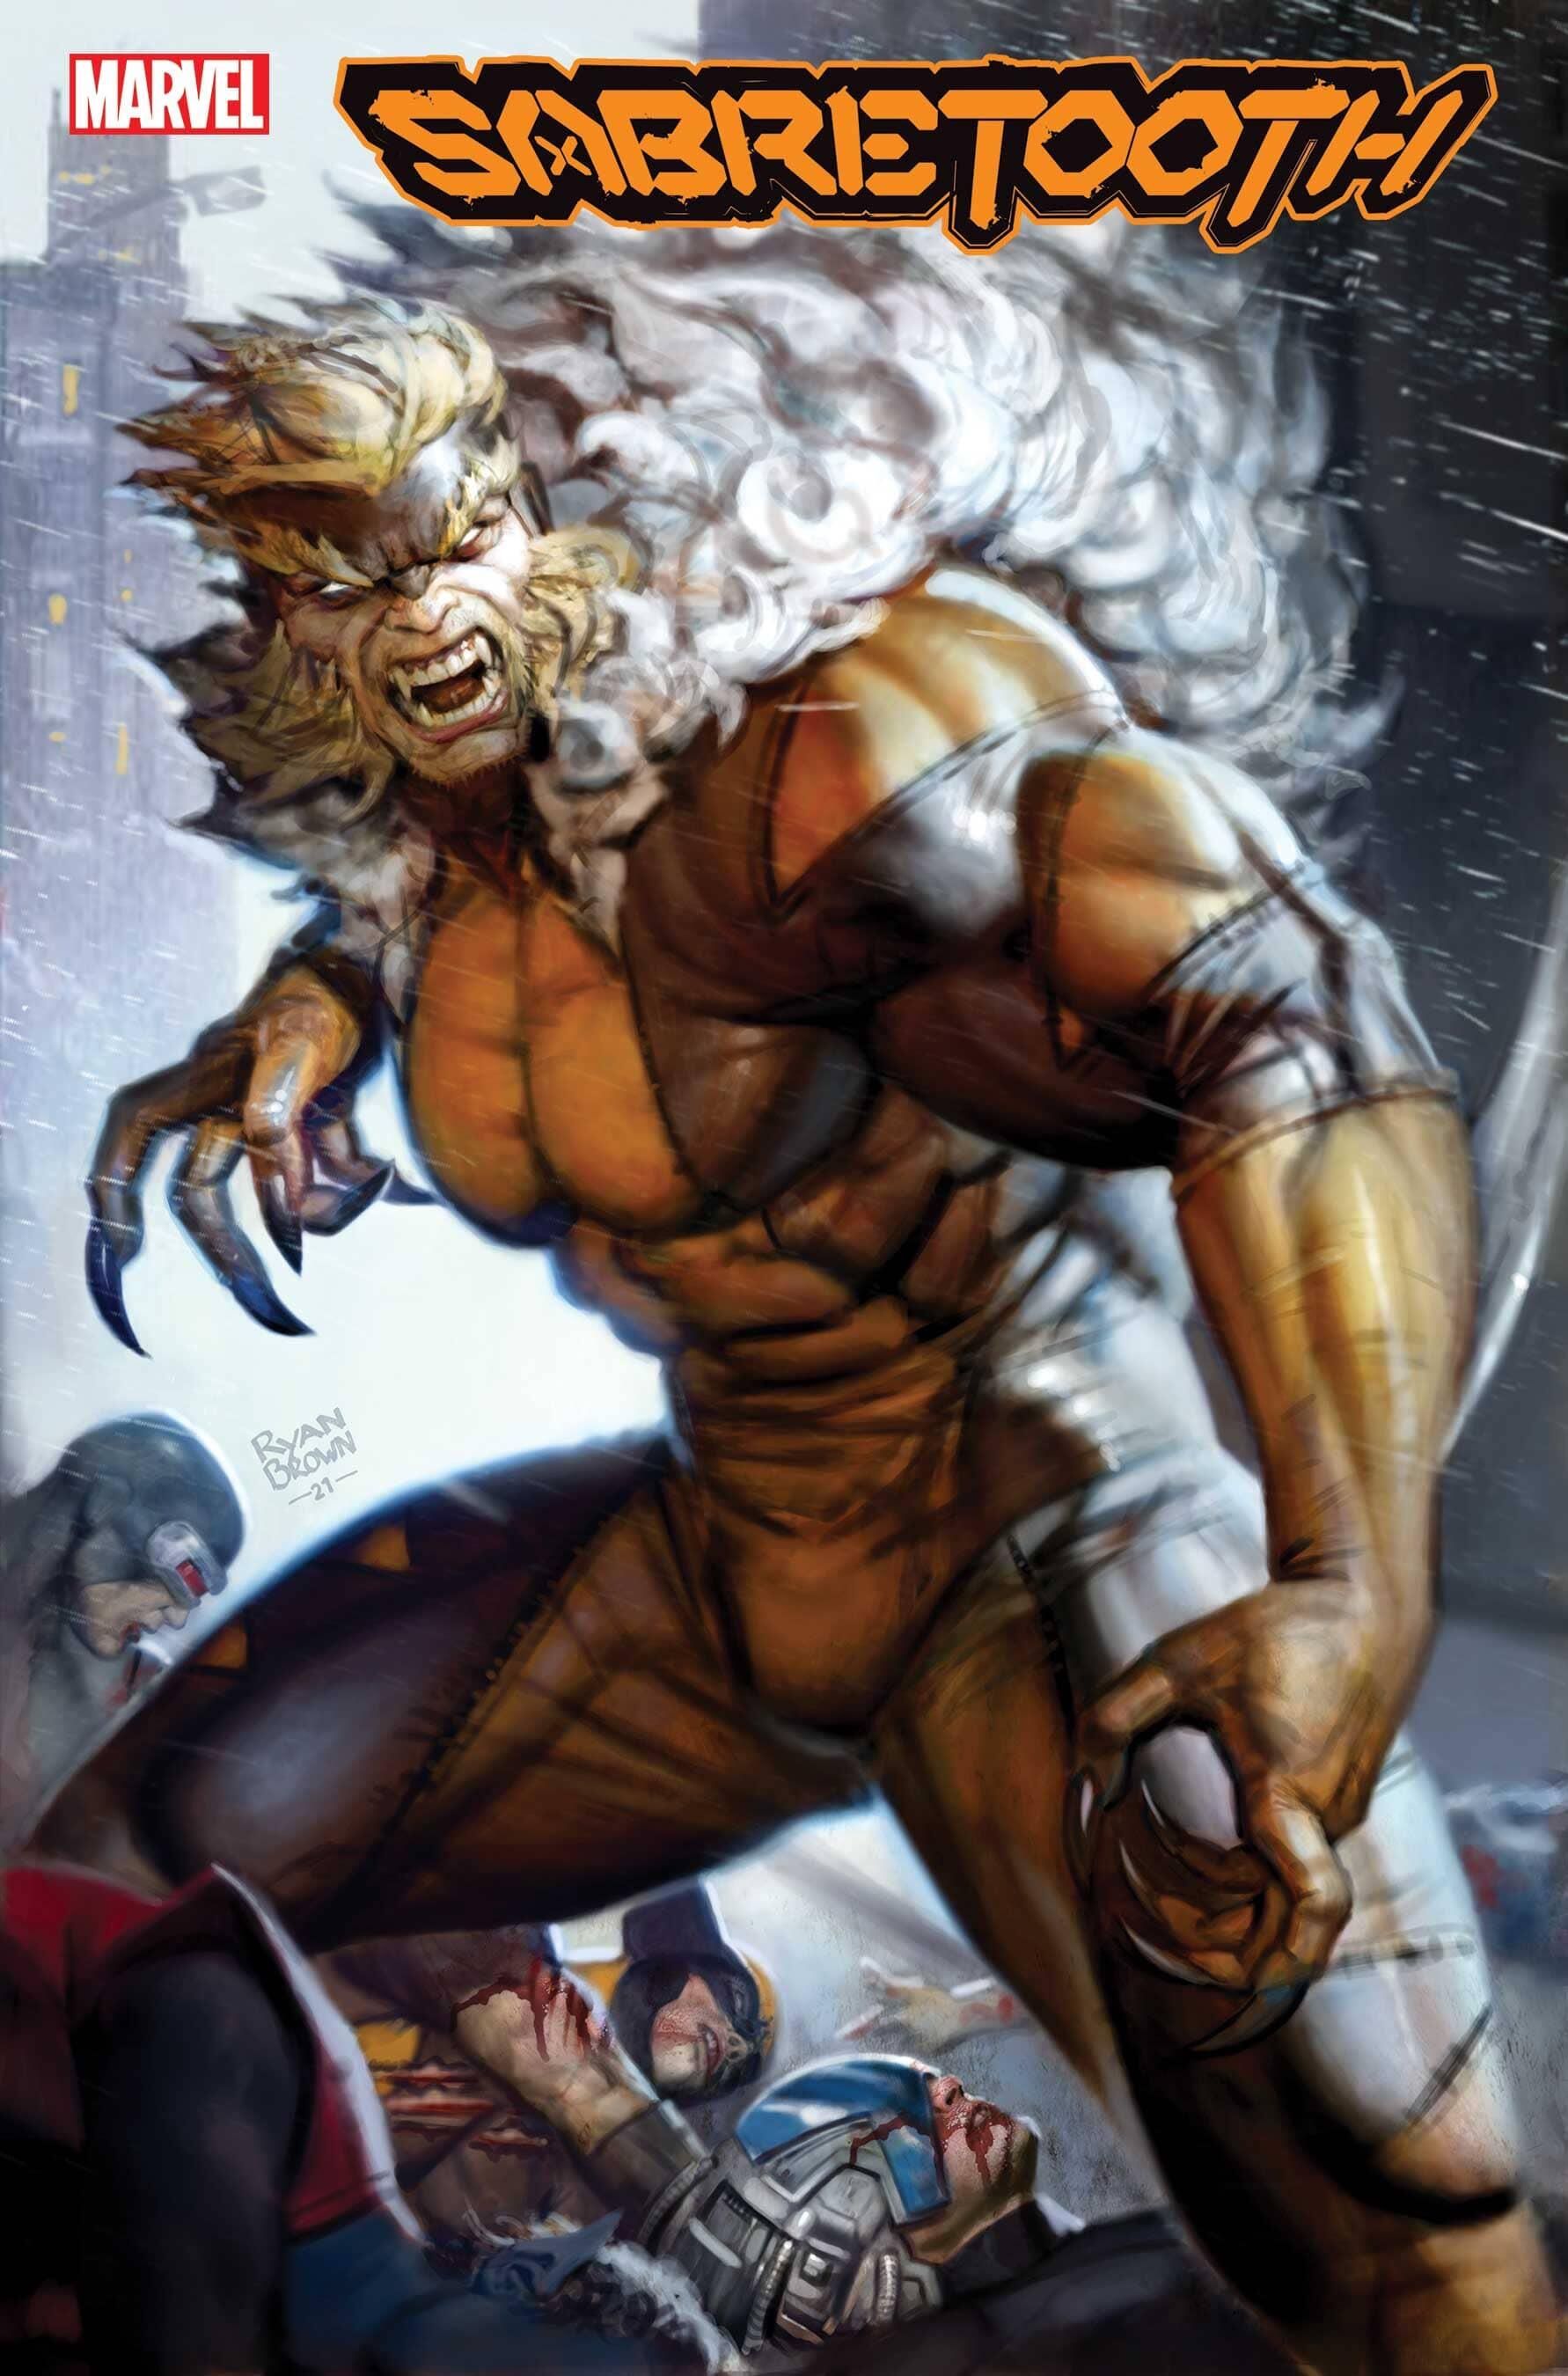 Sabretooth 1 variant cover